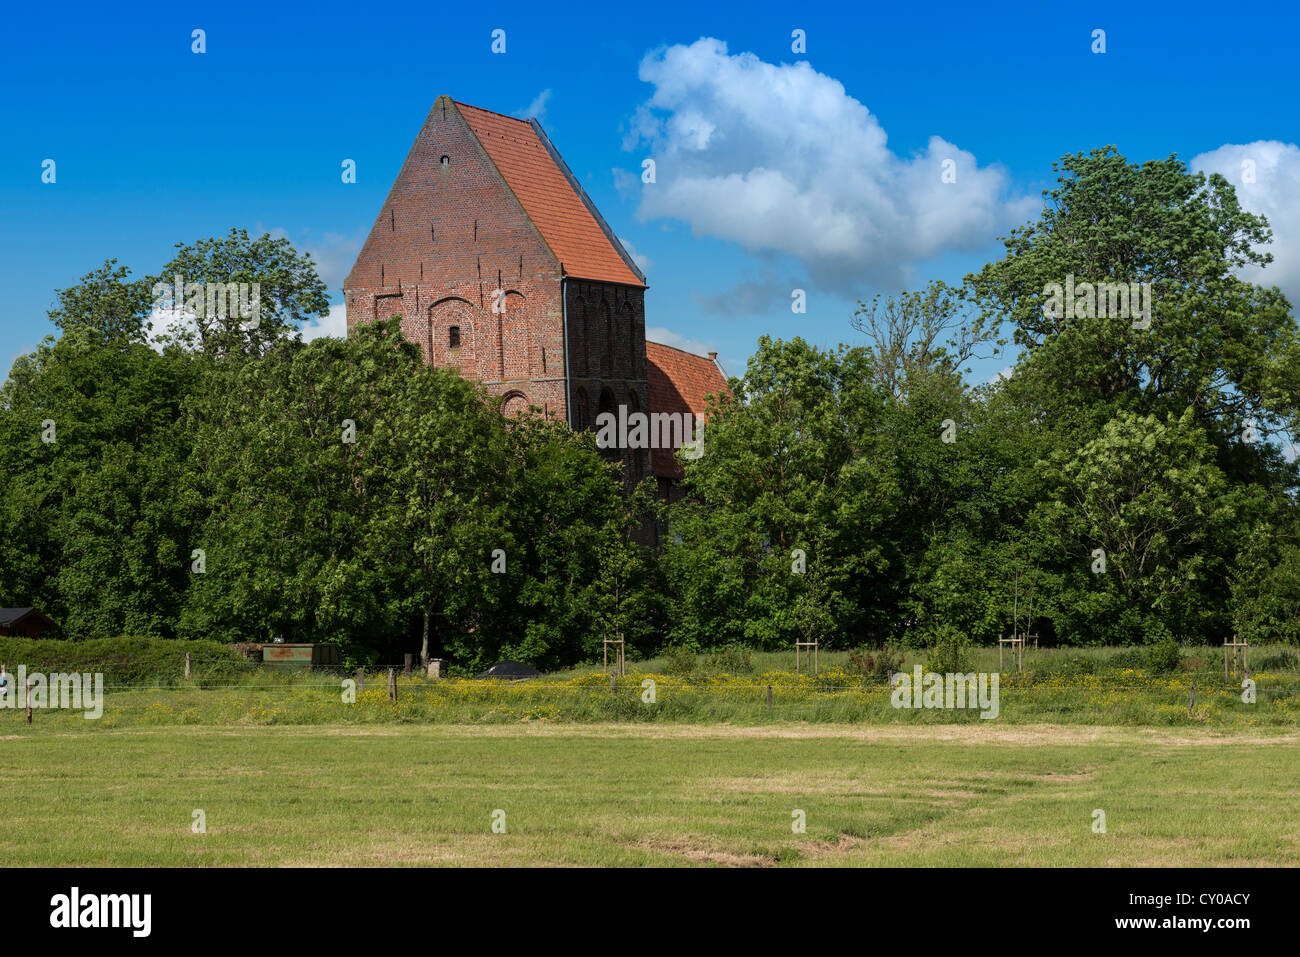 Leaning church tower of Suurhusen, entry in the Guinness Book of World Records, Hinte, East Frisia, Lower Saxony, PublicGround Stock Photo